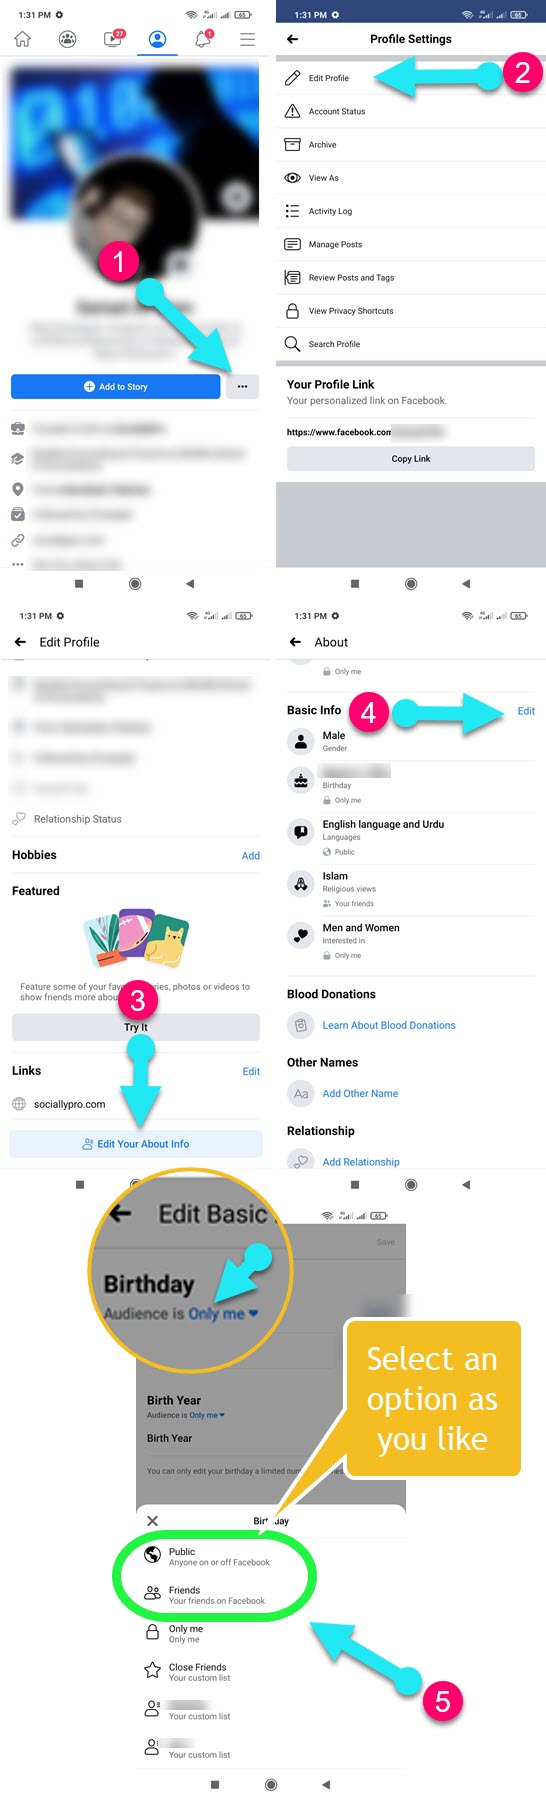 How to show birthday on Facebook using Facebook app